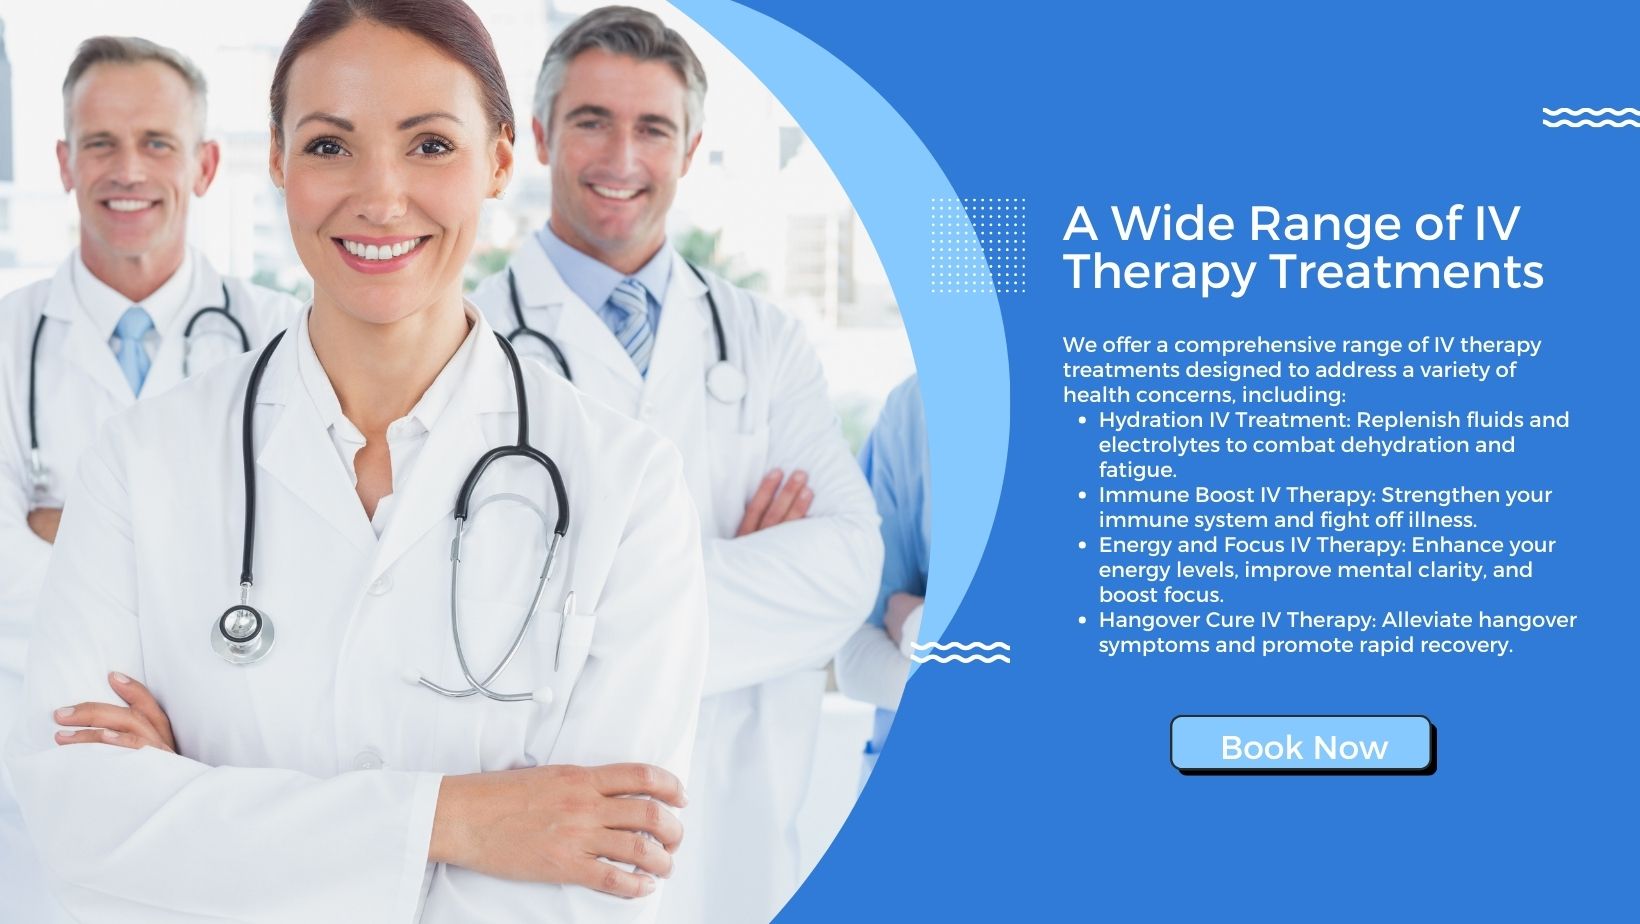 A Wide Range of IV Therapy Treatment